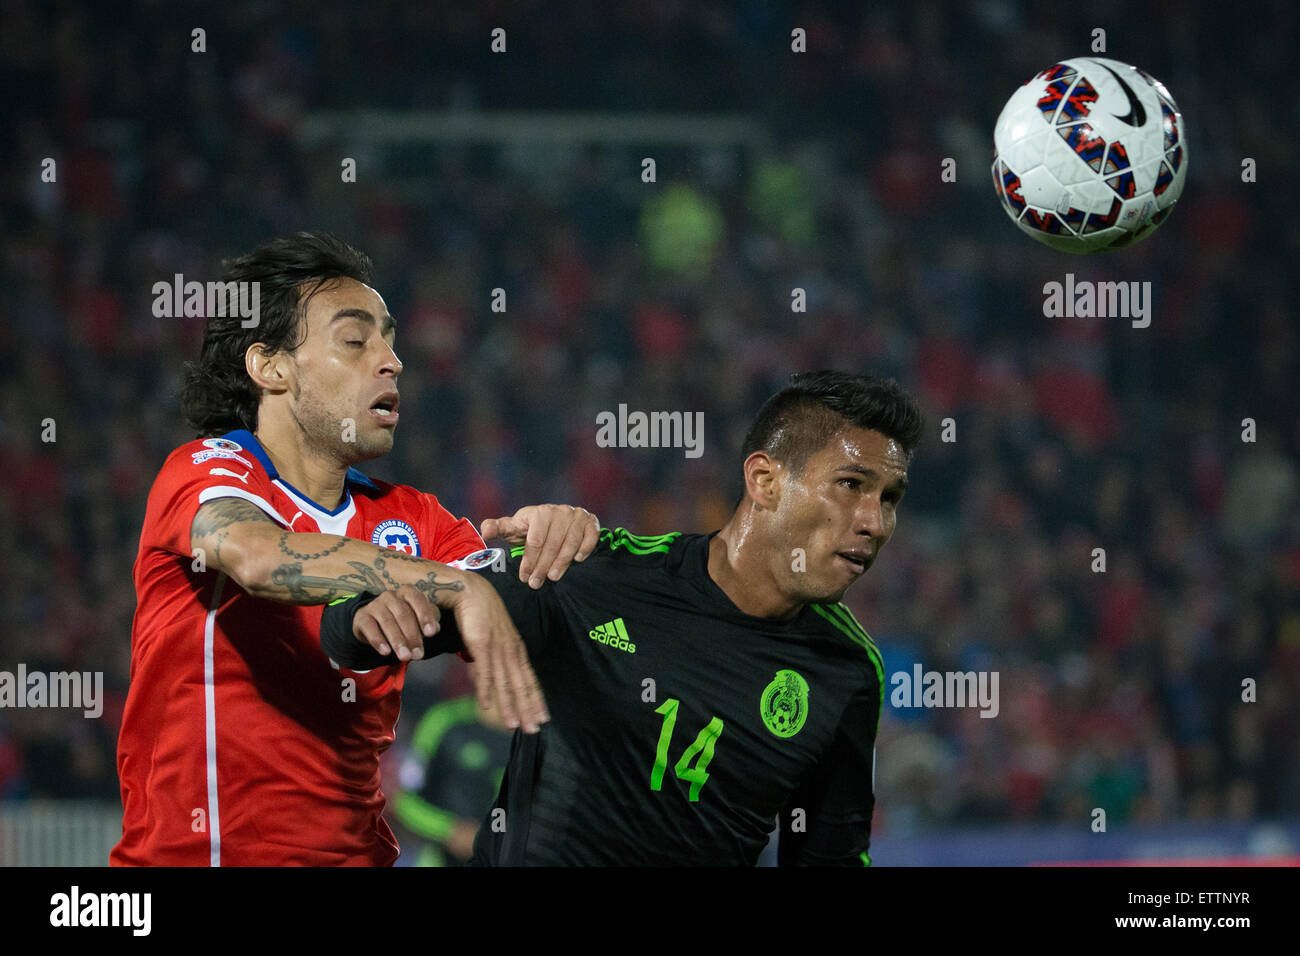 Santiago, Chile. 15th June, 2015. Jorge Valdivia (L) of Chile vies for the ball with Juan Valenzuela of Mexico during the the Group A match of the Copa America 2015, at the National Stadium, in Santiago, Chile, on June 15, 2015. The match ended with a 3-3 draw. Credit:  Pedro Mera/Xinhua/Alamy Live News Stock Photo